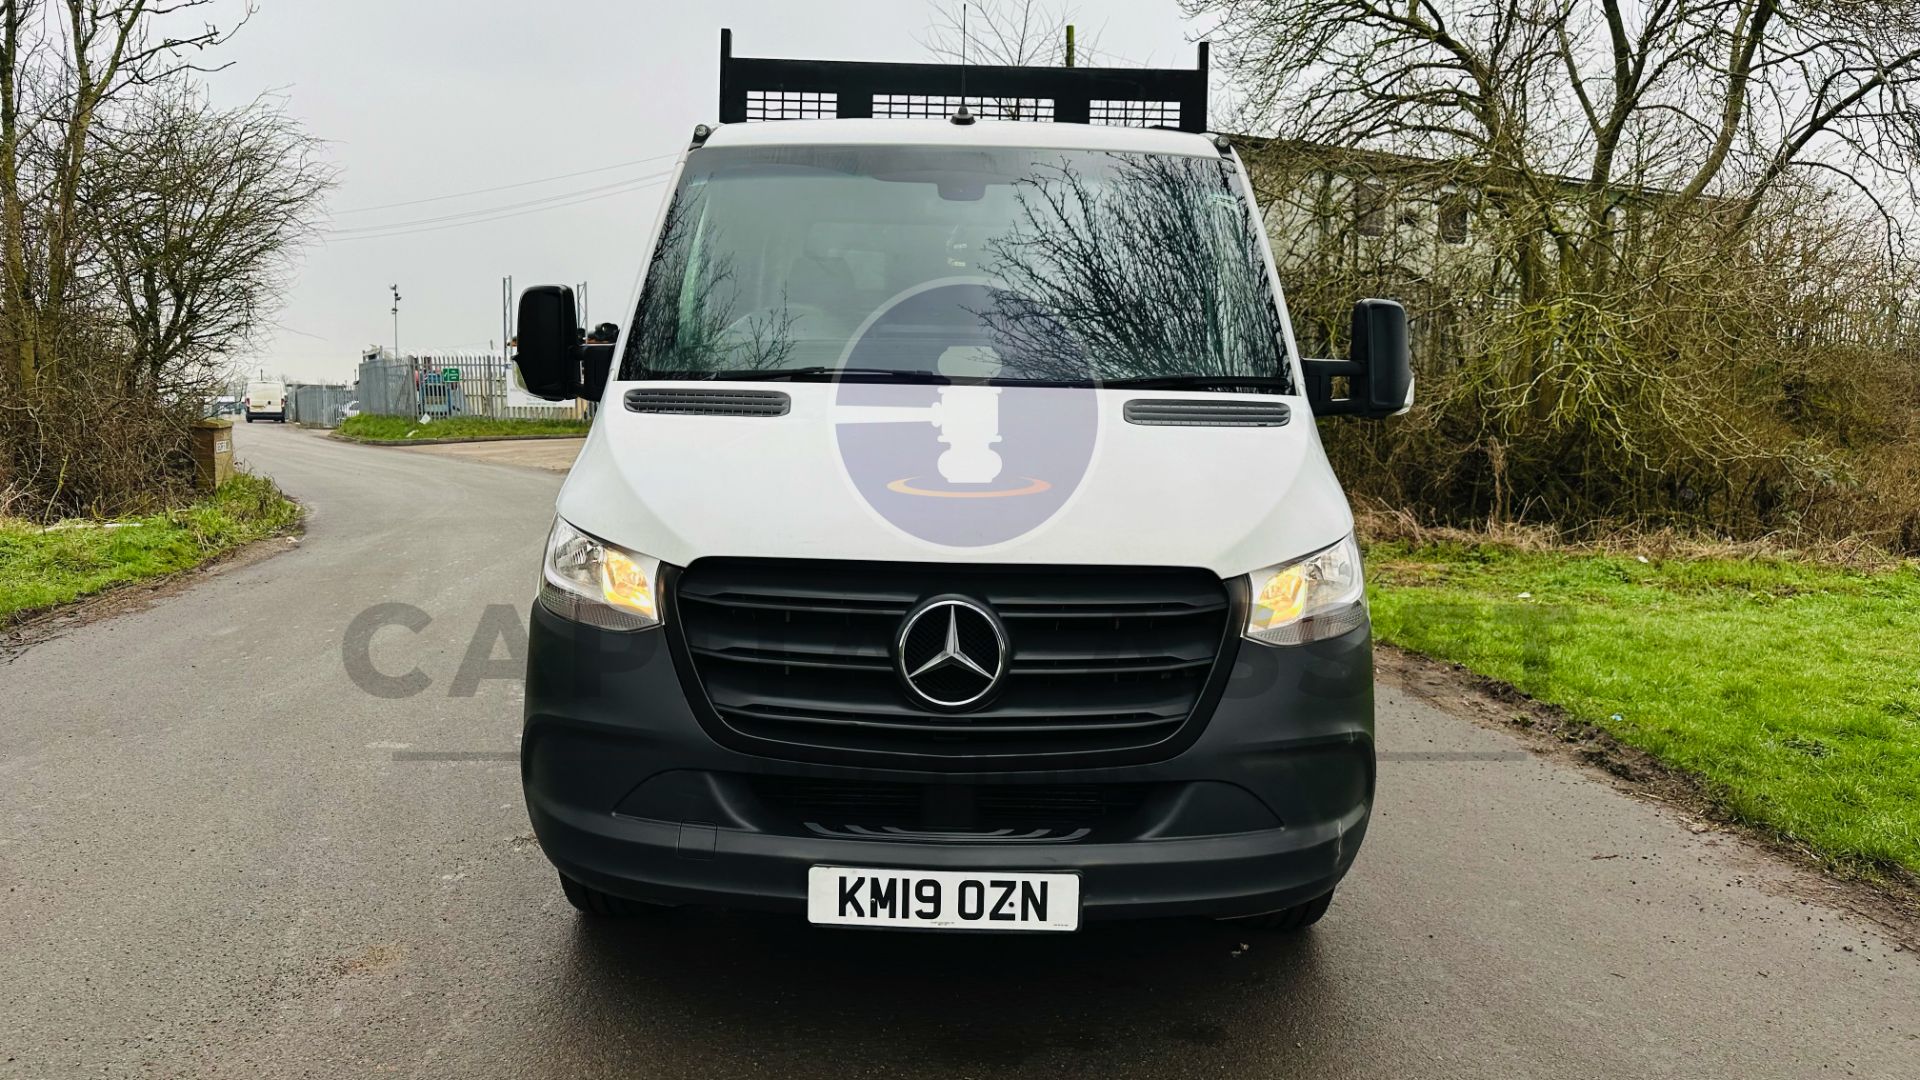 (On Sale) MERCEDES-BENZ SPRINTER 314 CDI *LWB - 7 SEATER D/CAB TIPPER* (2019 - NEW MODEL) *EURO 6* - Image 6 of 38